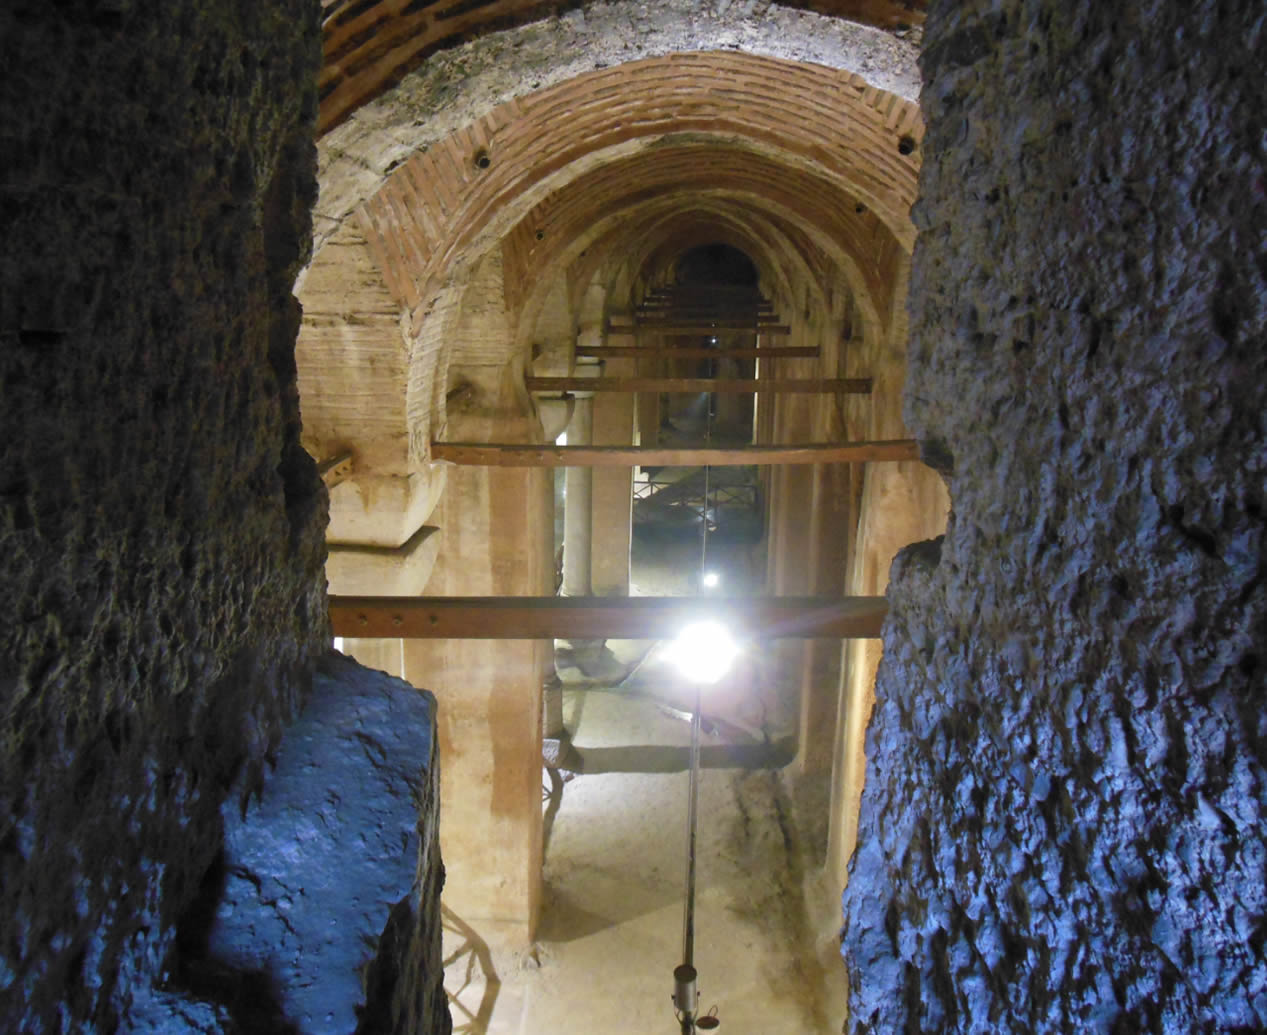 Caption: Byzantine Cistern for Storing Water, Istanbul